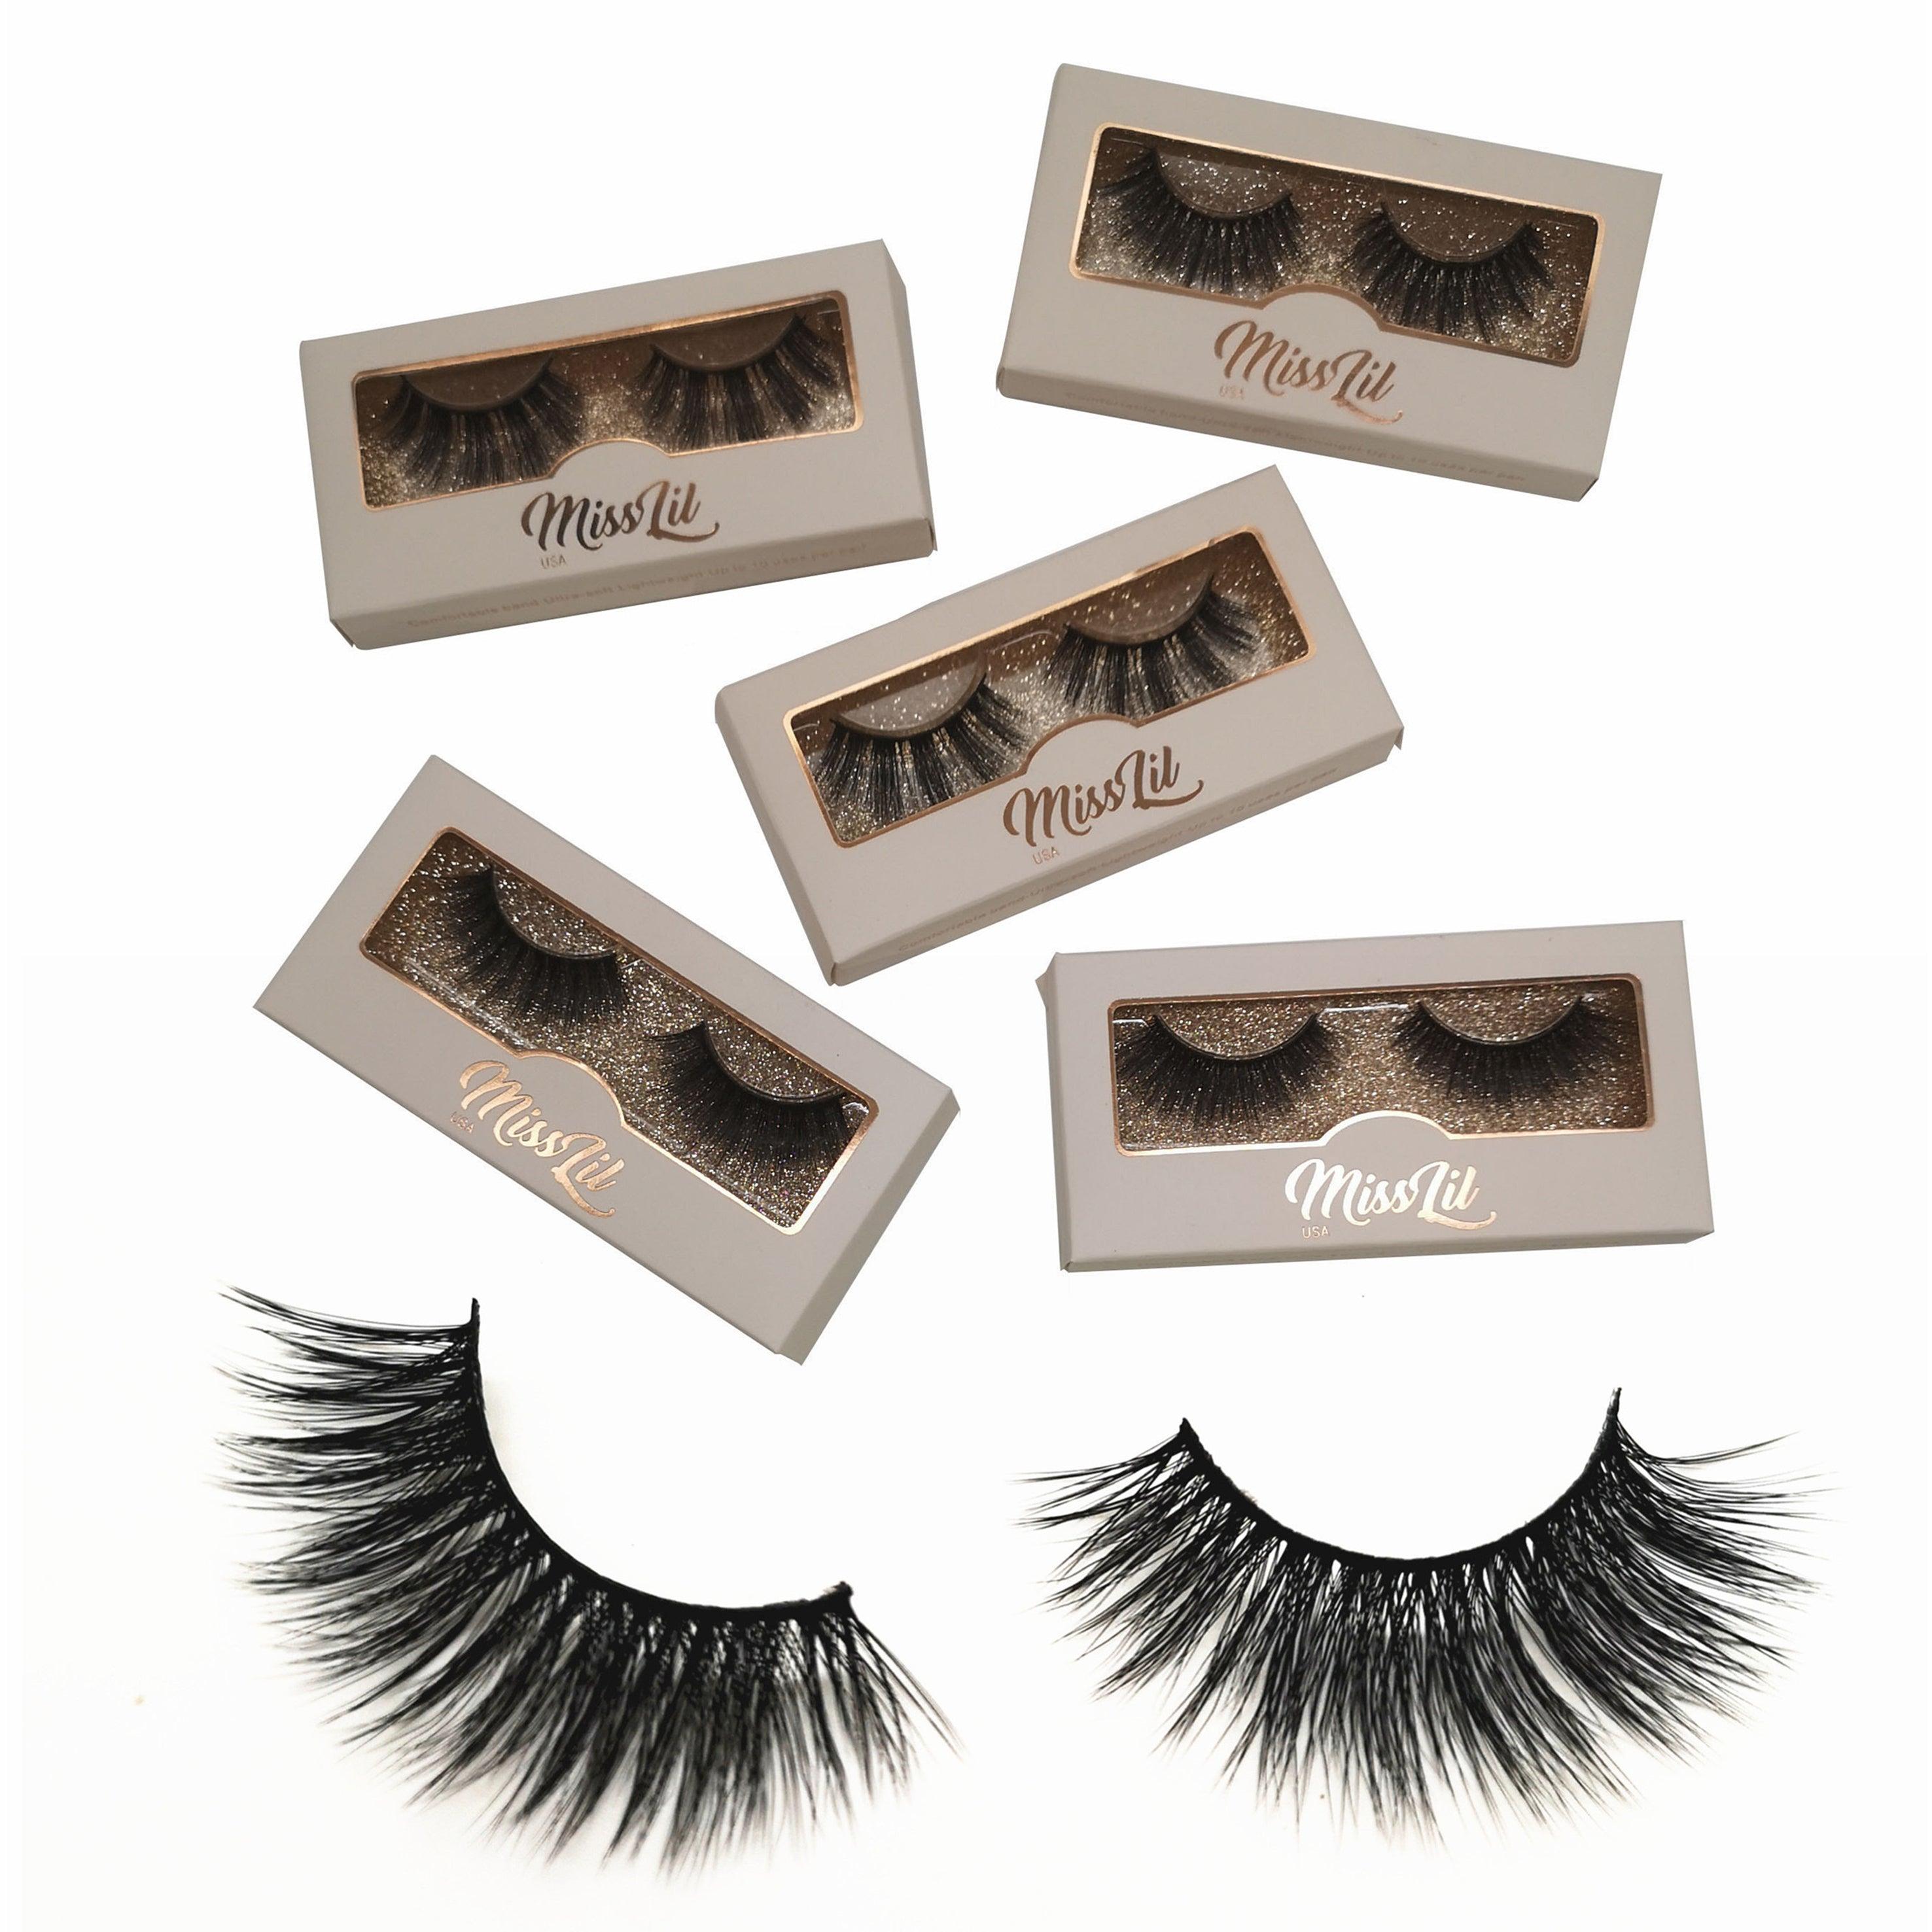 1 Pair Miss Lil USA Lashes #6 (Pack of 12) - Miss Lil USA Wholesale